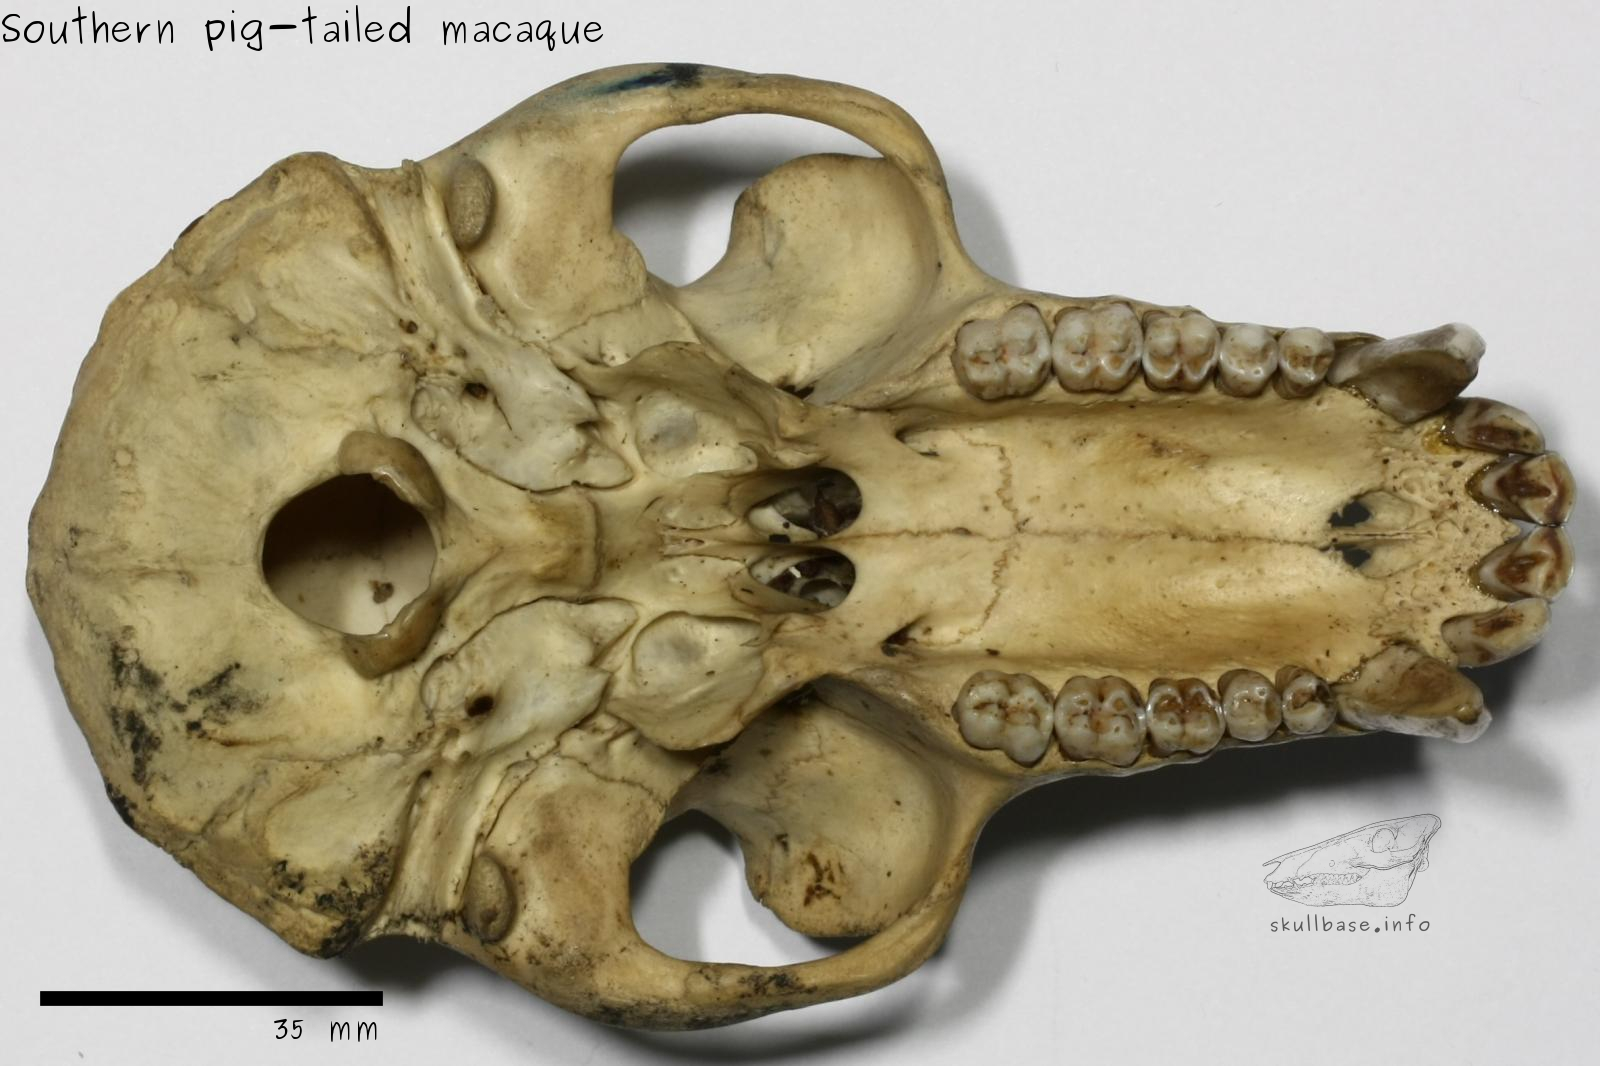 Southern pig-tailed macaque (Macaca nemestrina) skull ventral view